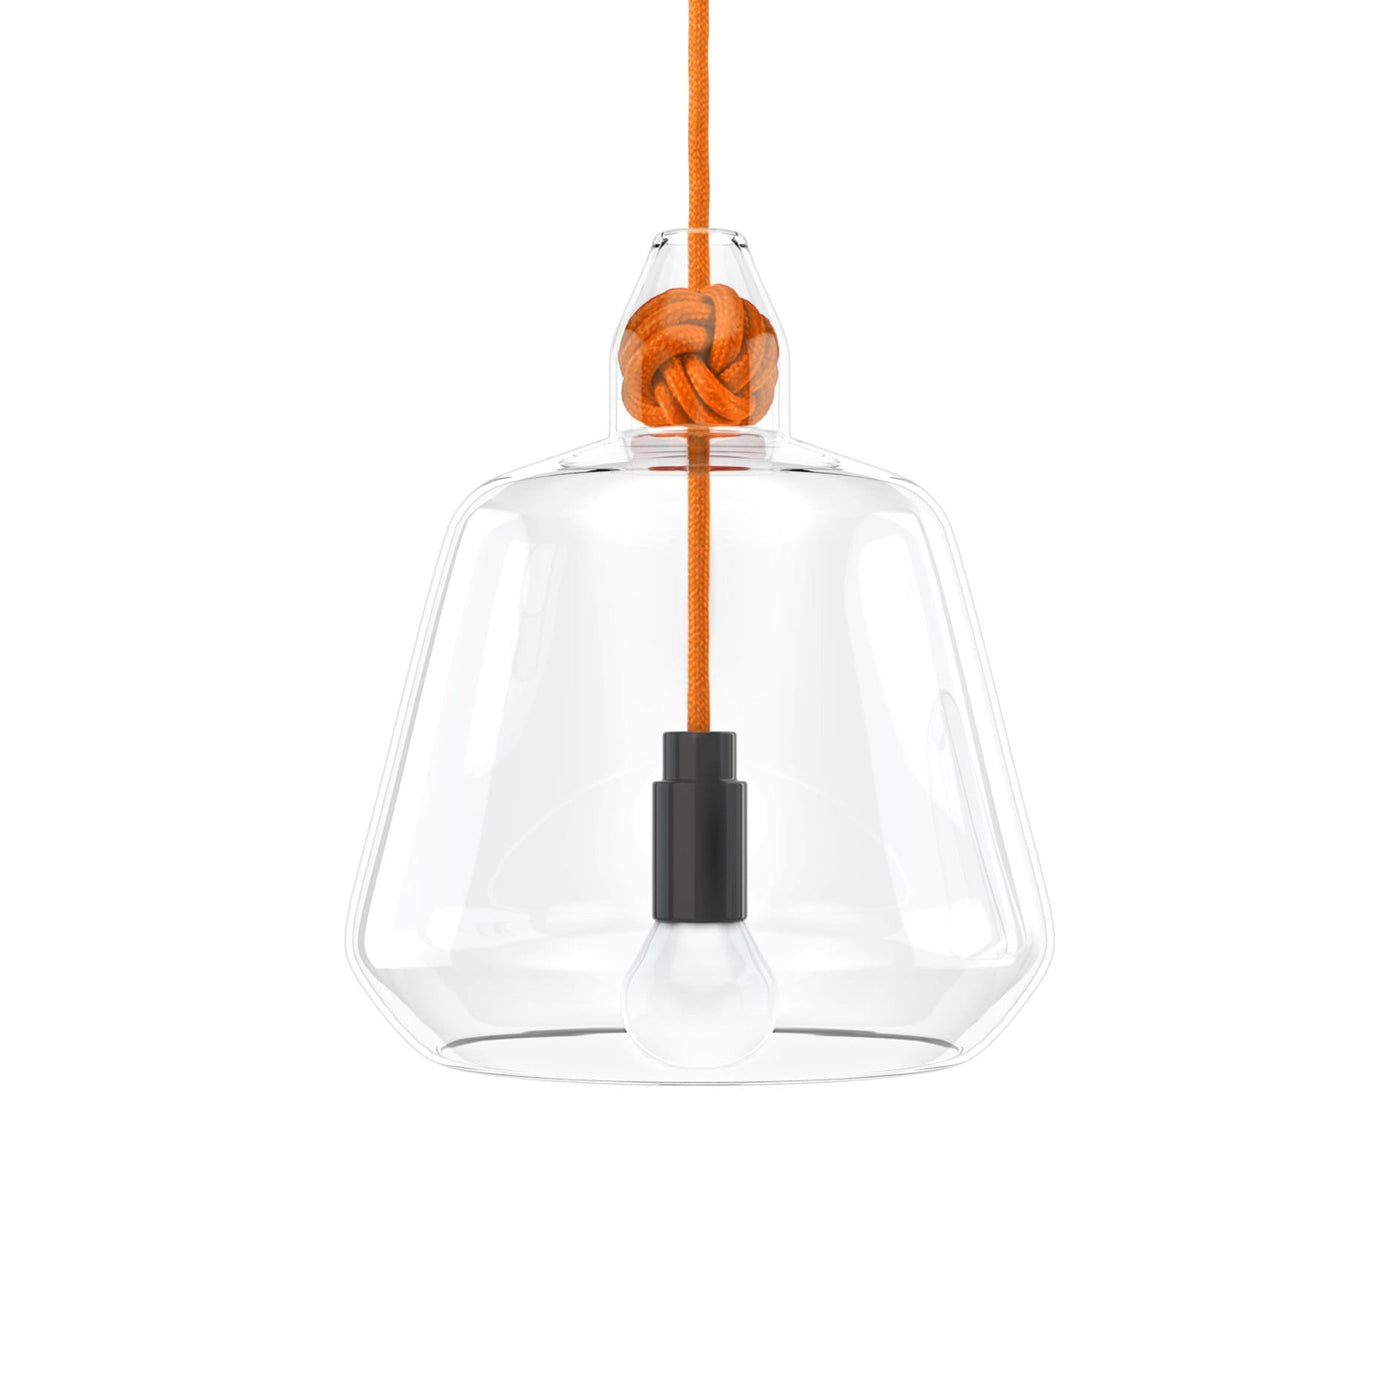 Vitamin Large Knot Pendant Lamp in orange. Buy now from someday designs